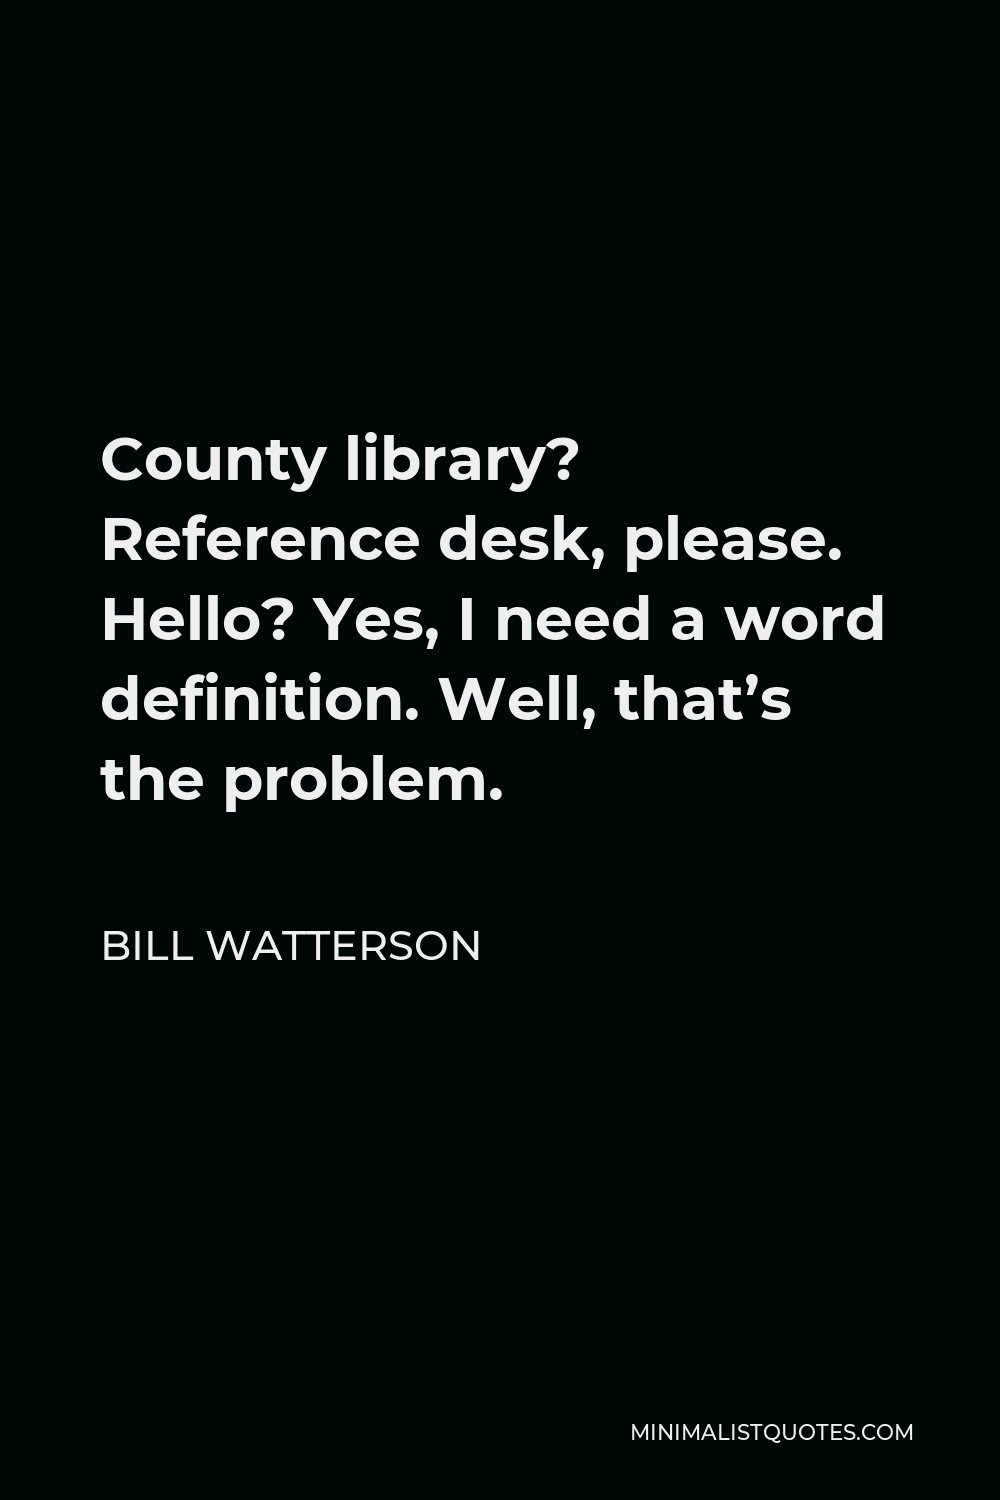 Bill Watterson Quote - County library? Reference desk, please. Hello? Yes, I need a word definition. Well, that’s the problem.